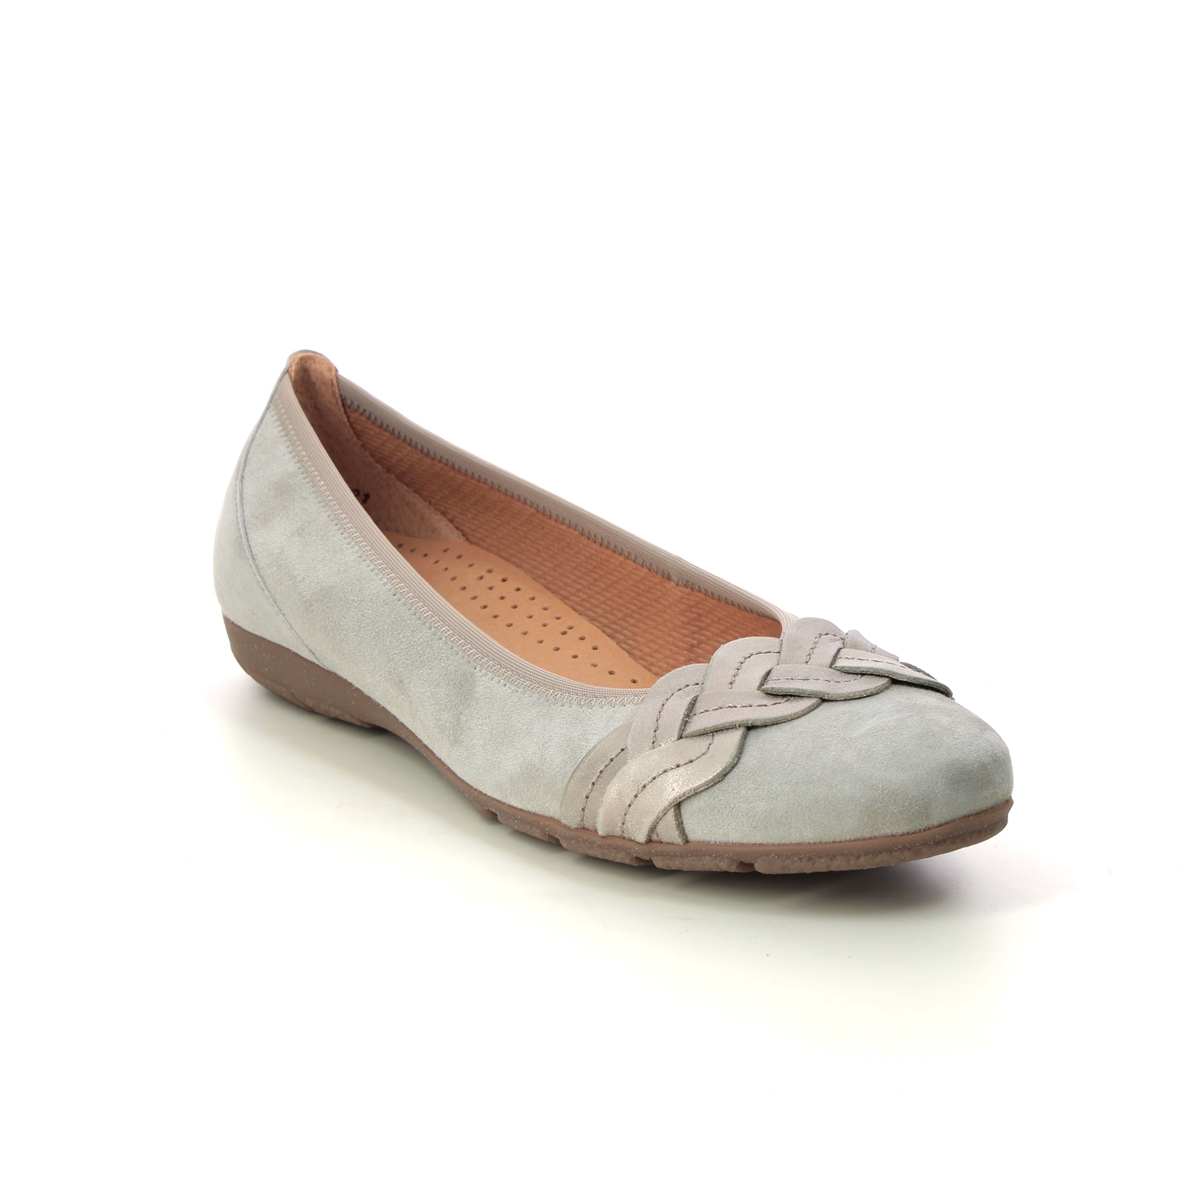 Gabor Redhill Hovercraft Light Taupe suede Womens pumps 44.160.12 in a Plain Leather in Size 7.5